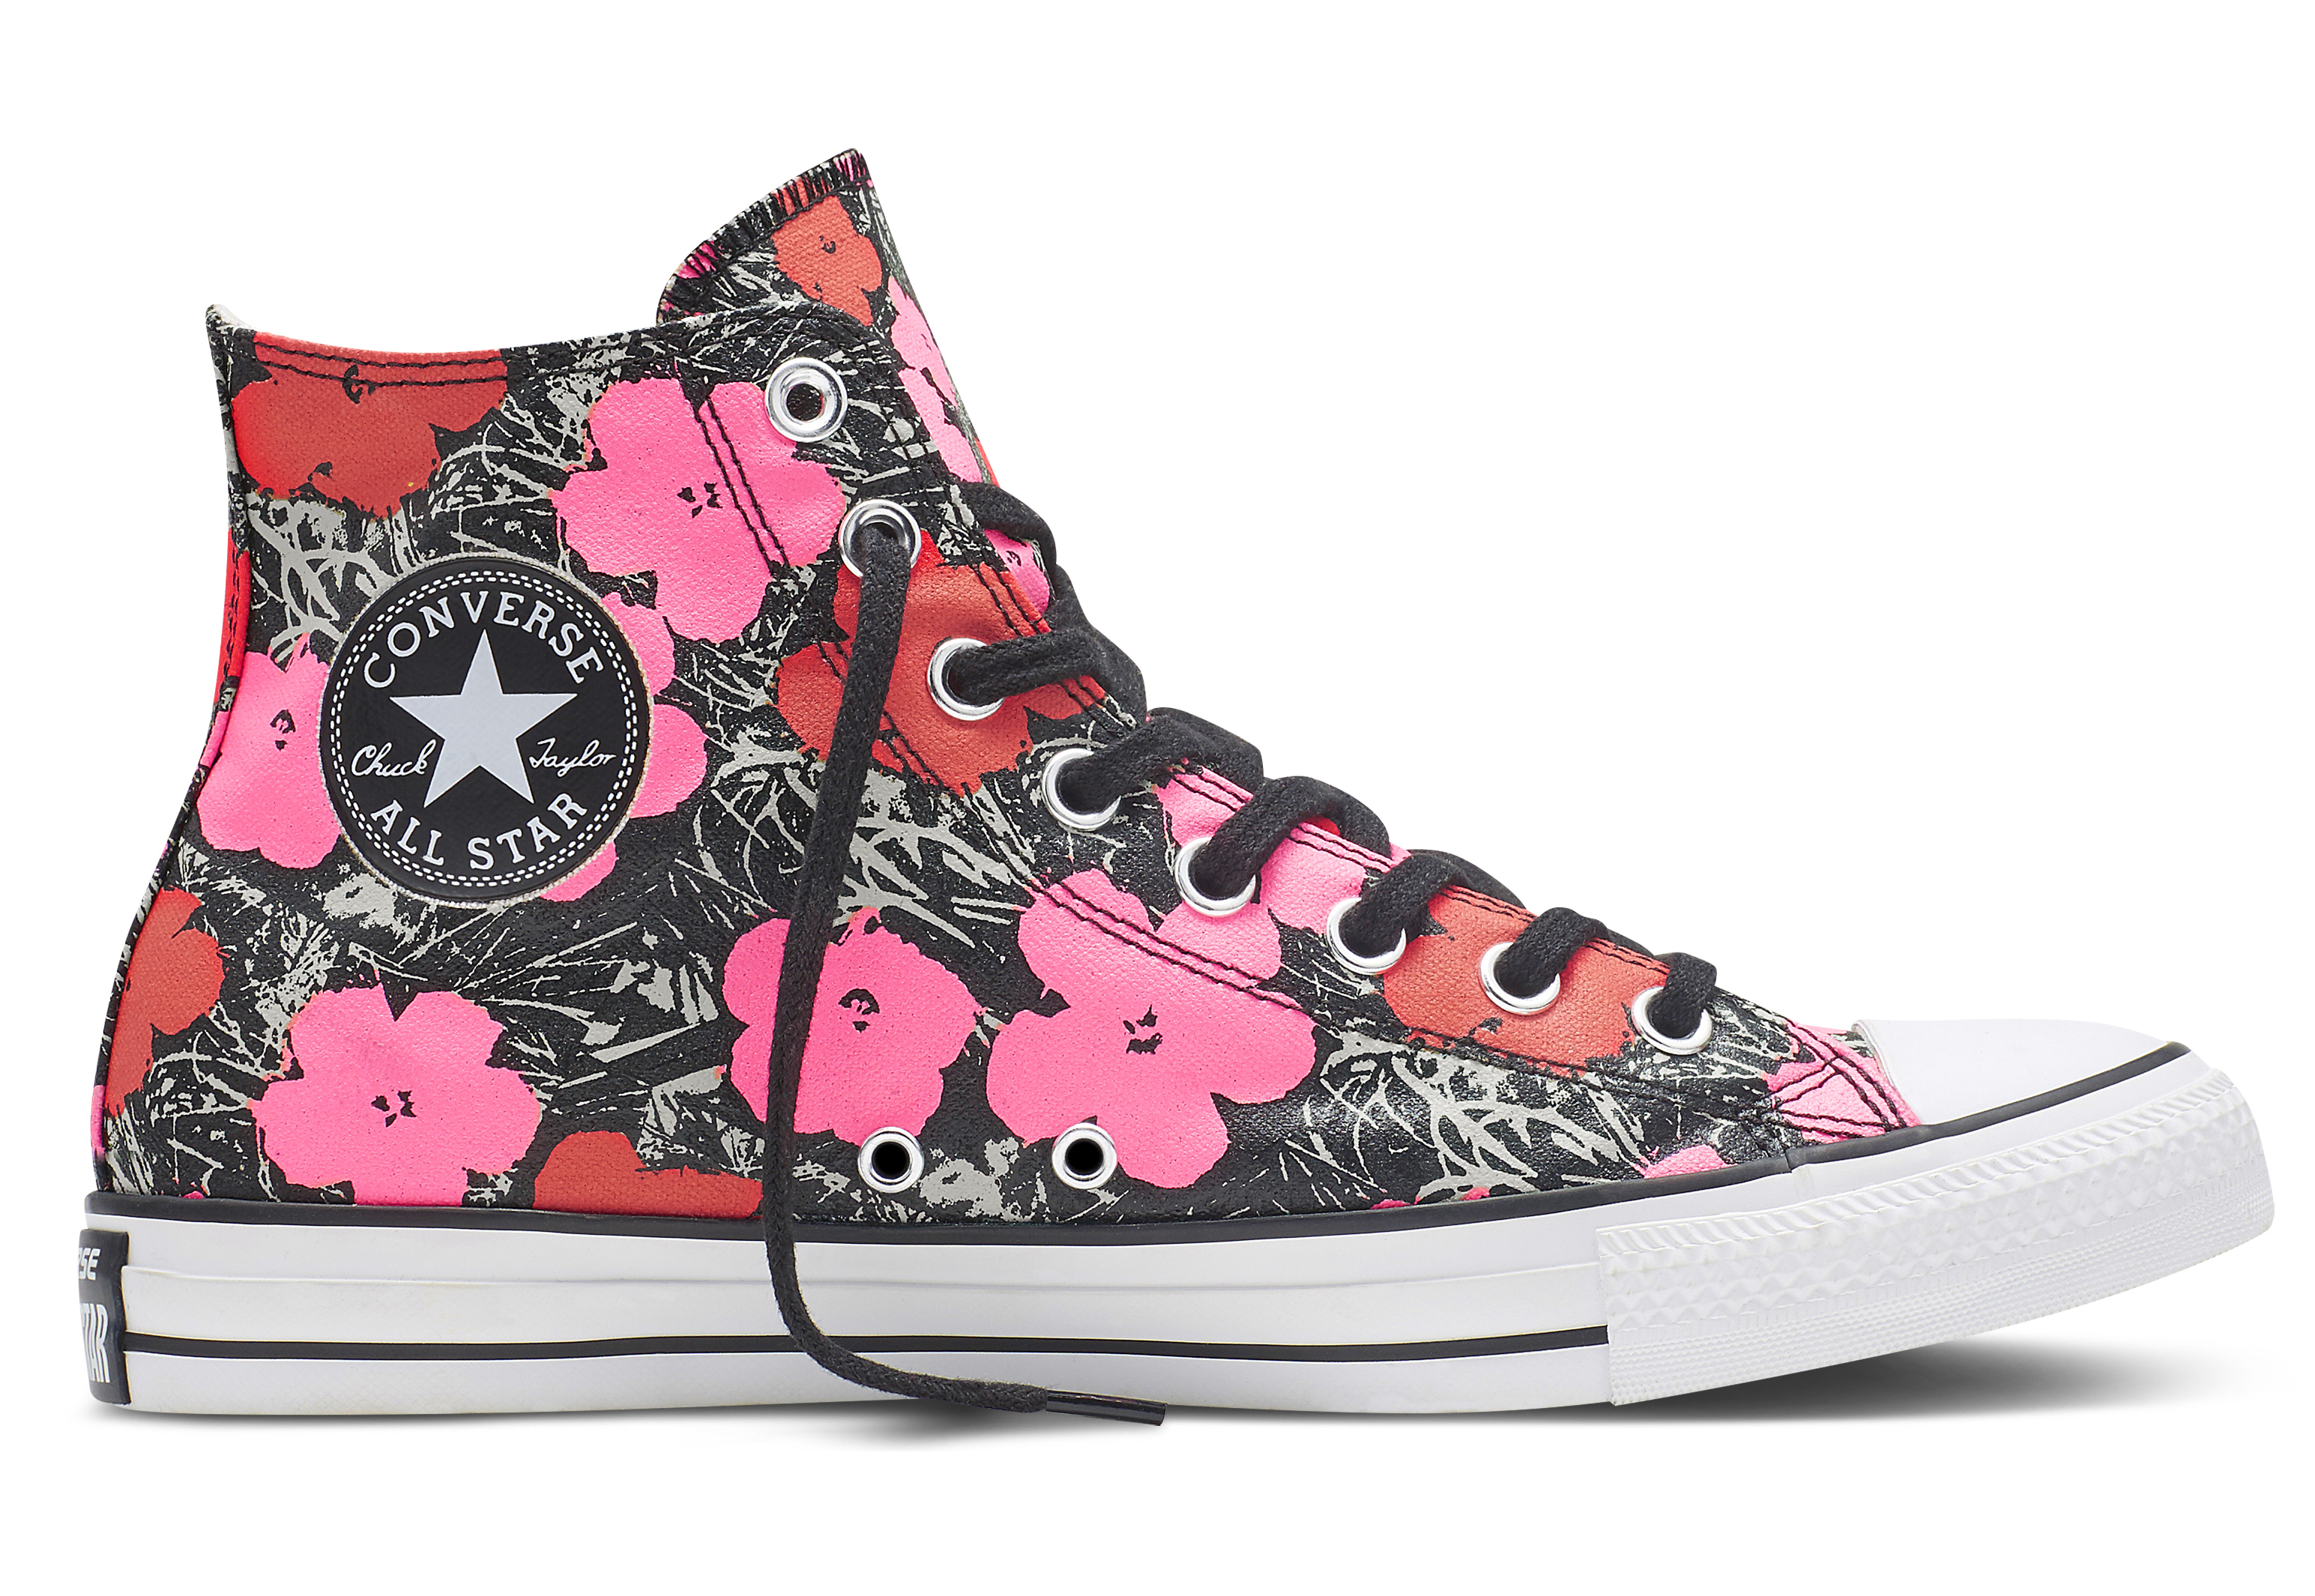 Above: One of four floral kicks from the spring 2016 Converse All Star Andy Warhol collection